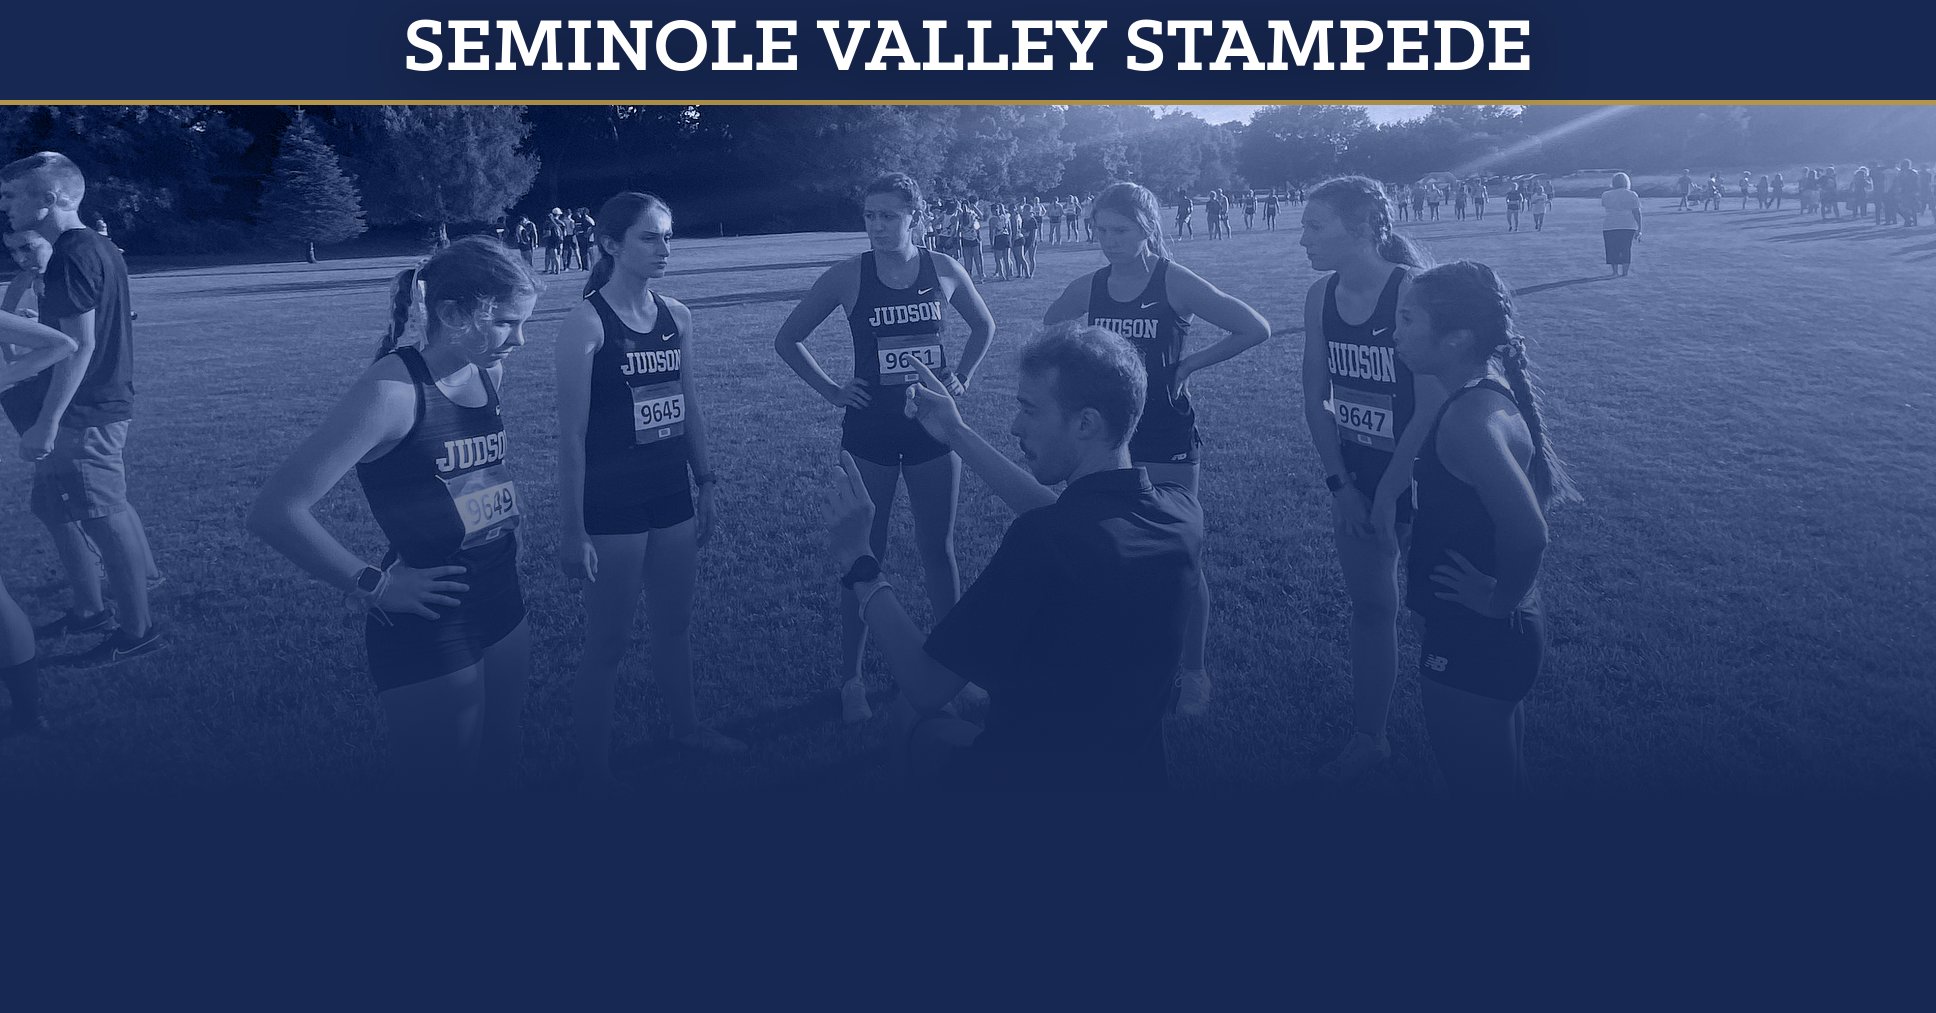 Both Cross Country Teams Place Top-10 at Seminole Valley Stampede